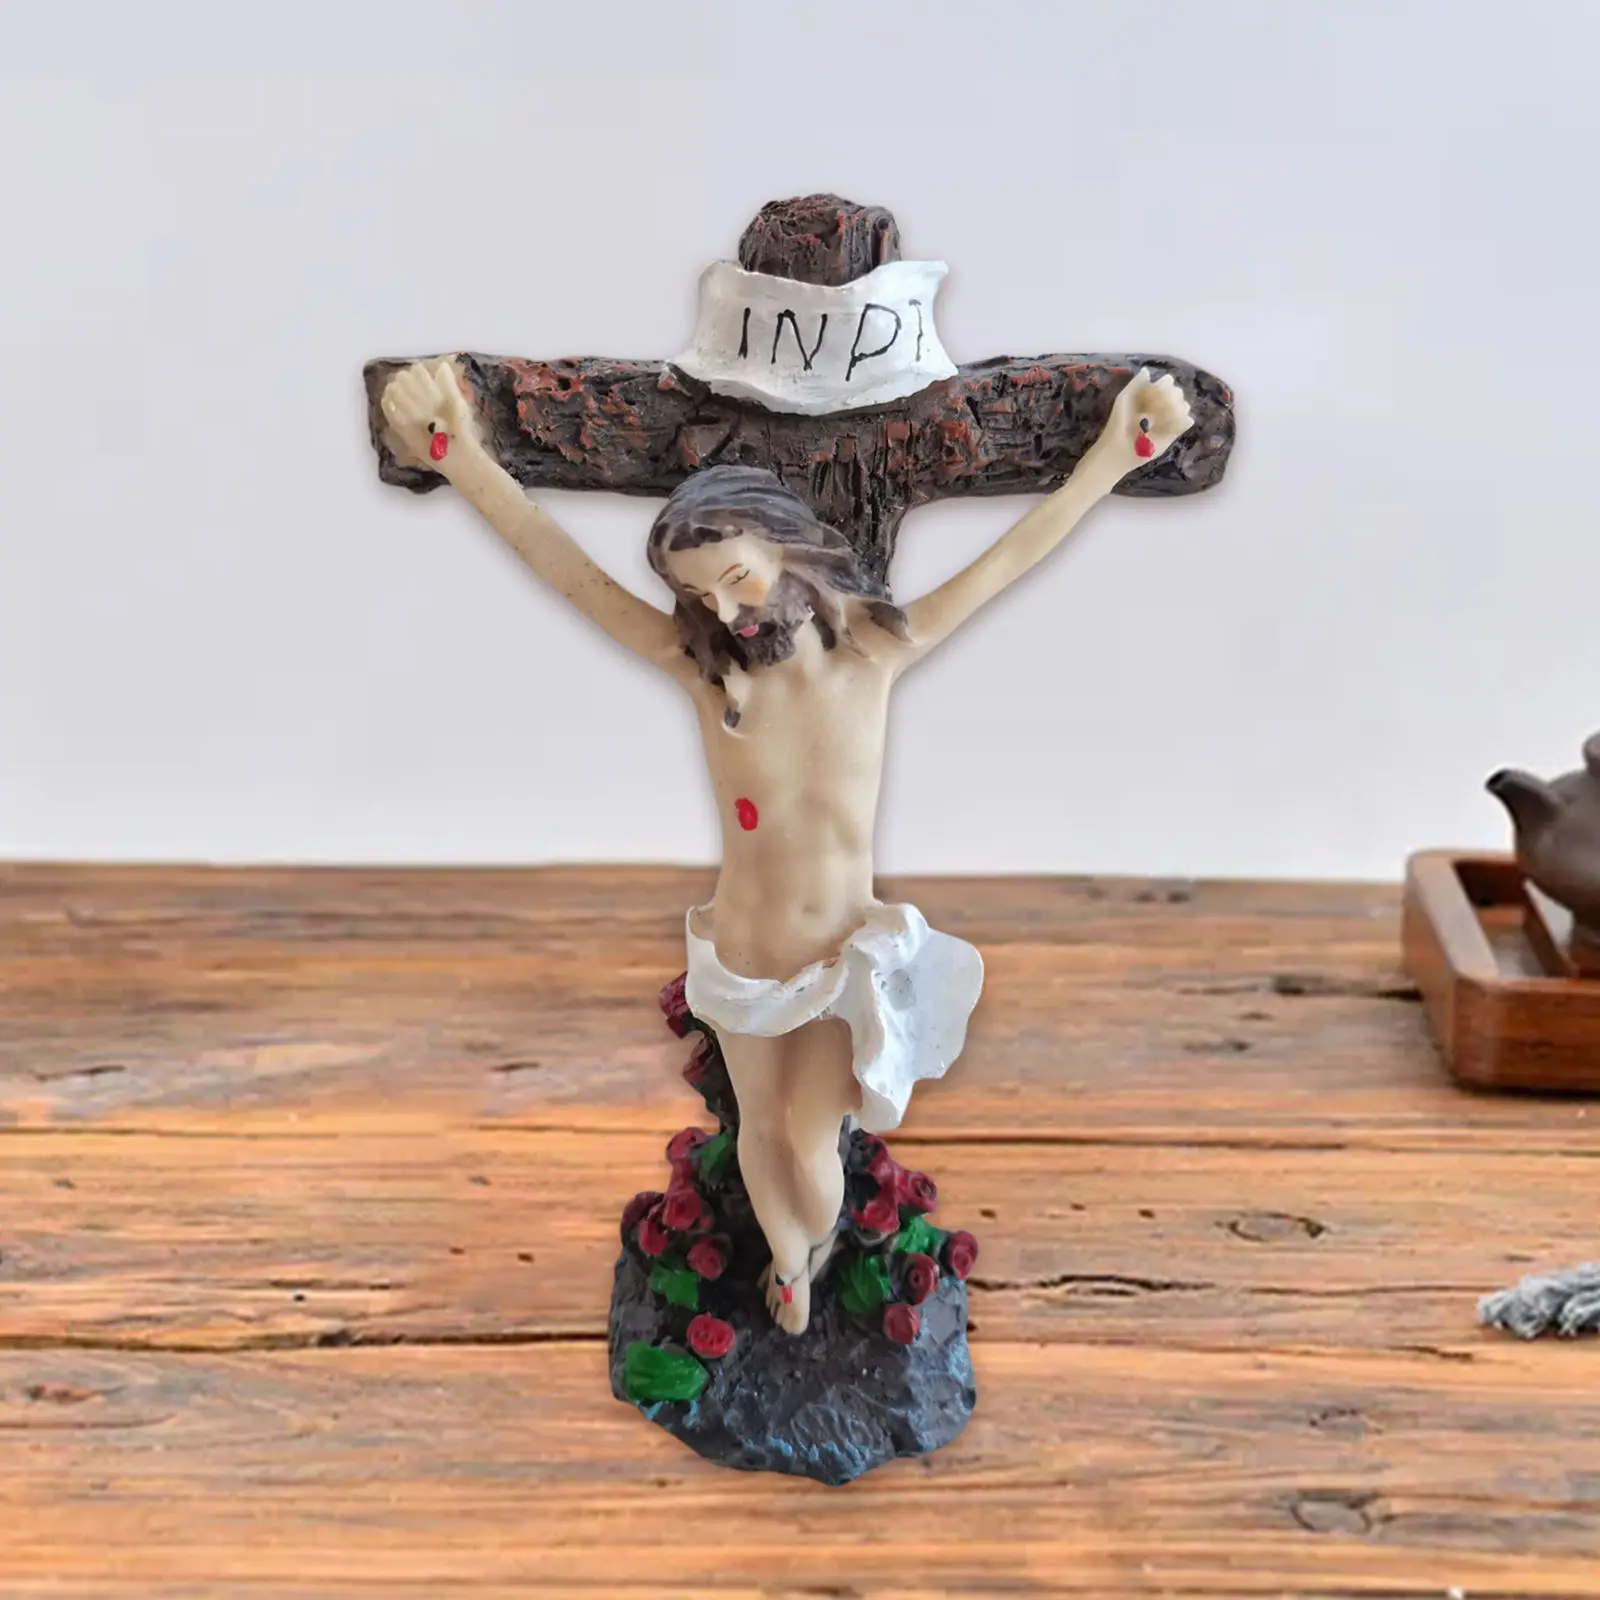 1Pc Jesus Crucifix Statue Holy Figurine Wall Home Church Decor Collection